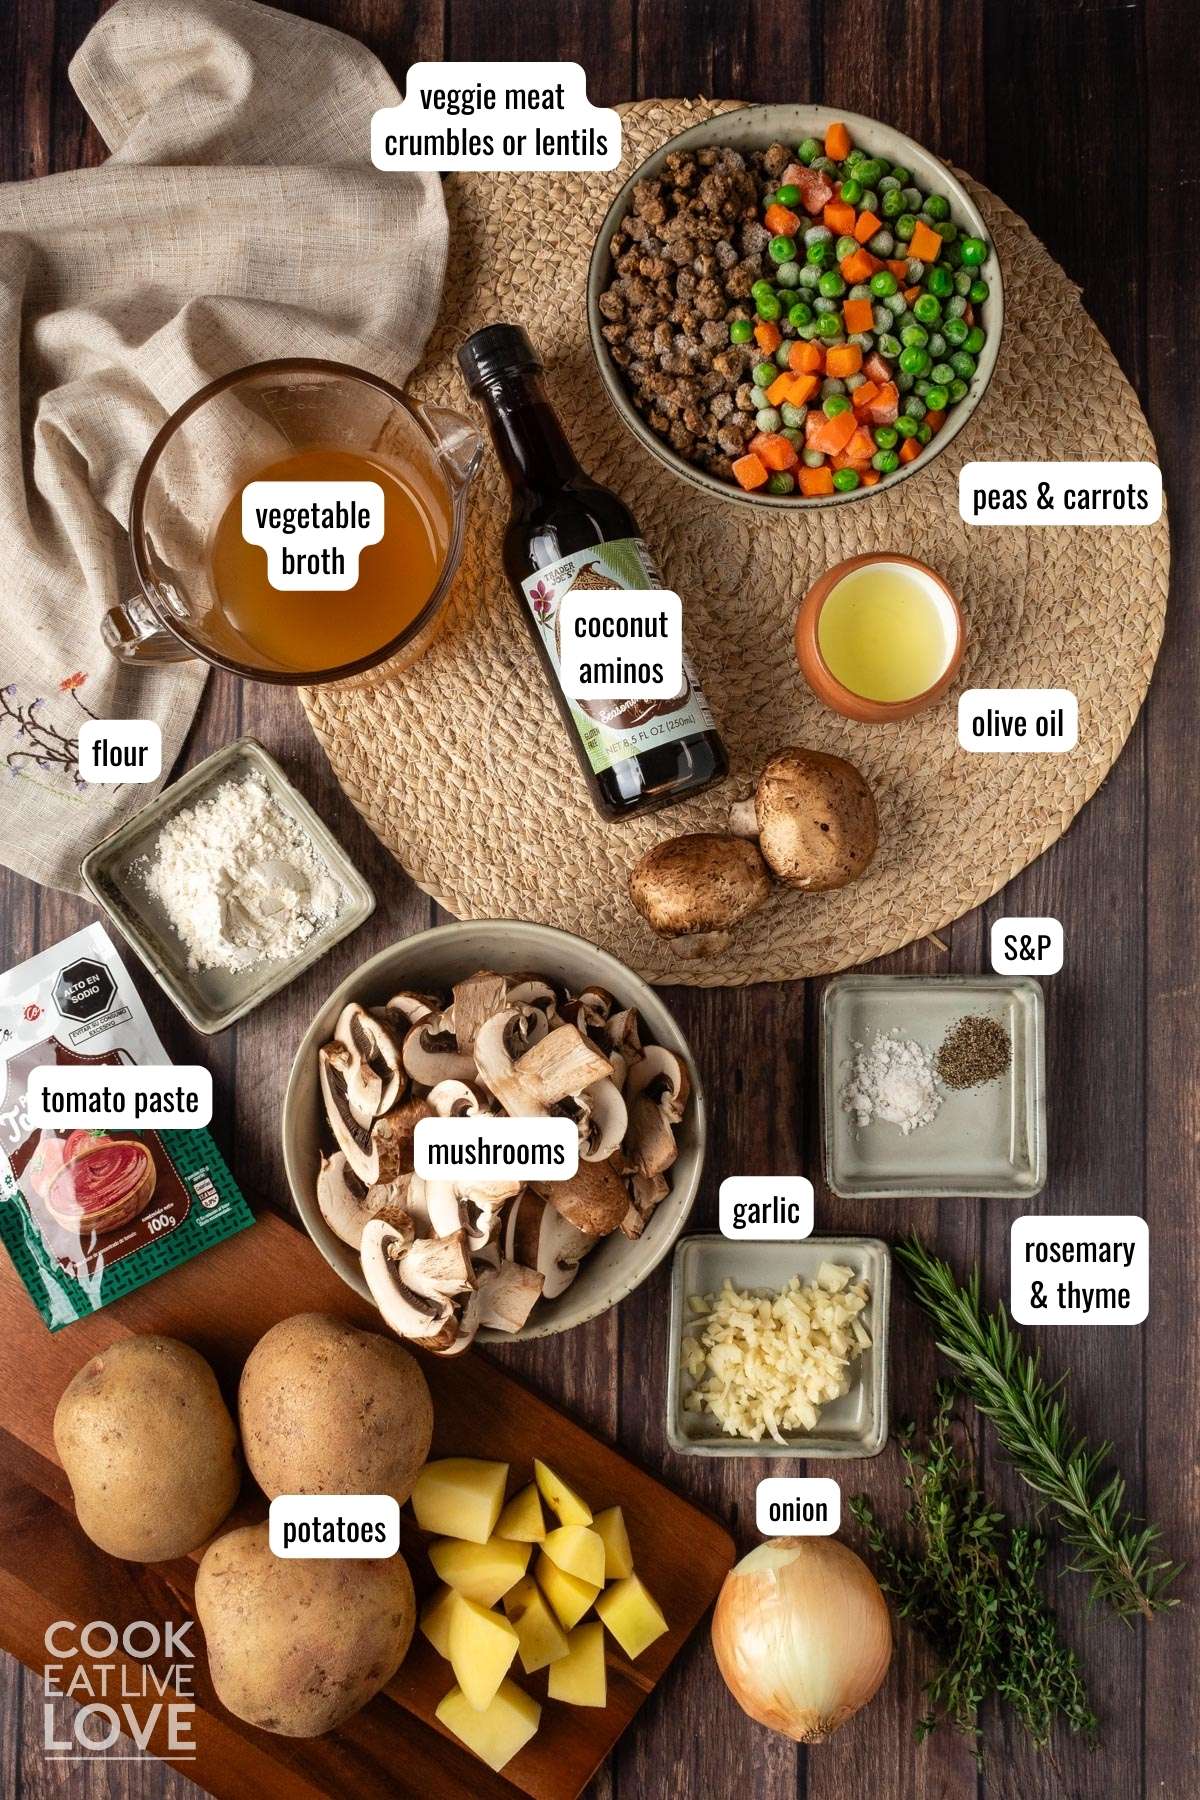 Ingredients to make shepherd's pie with mushrooms on the table ready to prepare.